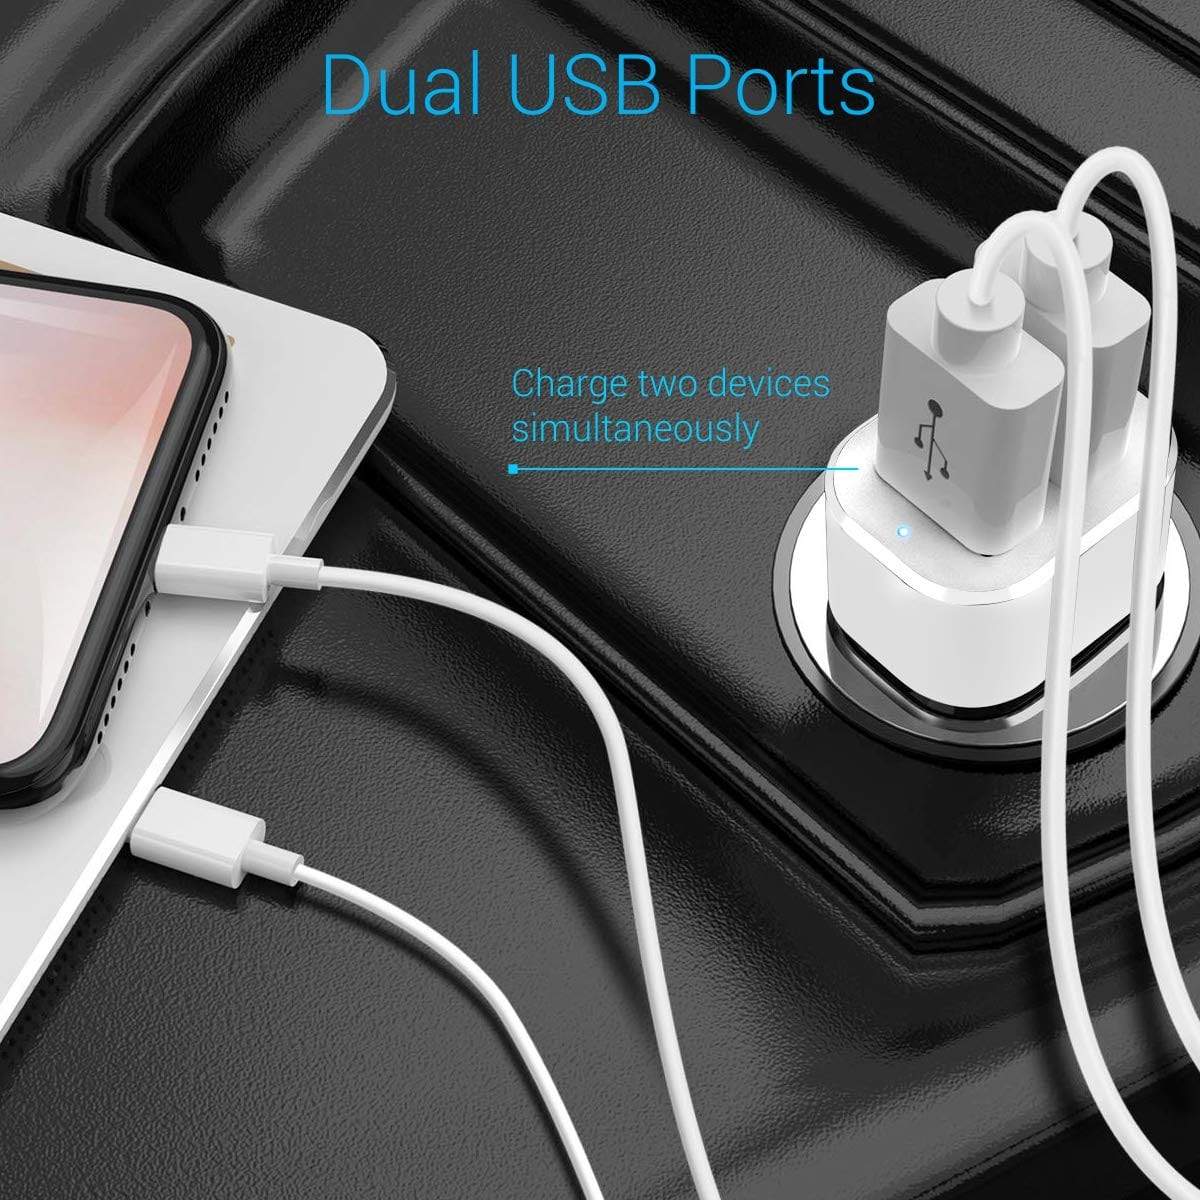 Portronics CarPower 3T 3.4A Car Charger with Three USB Port, 1M USB Cable-Power Bank-dealsplant